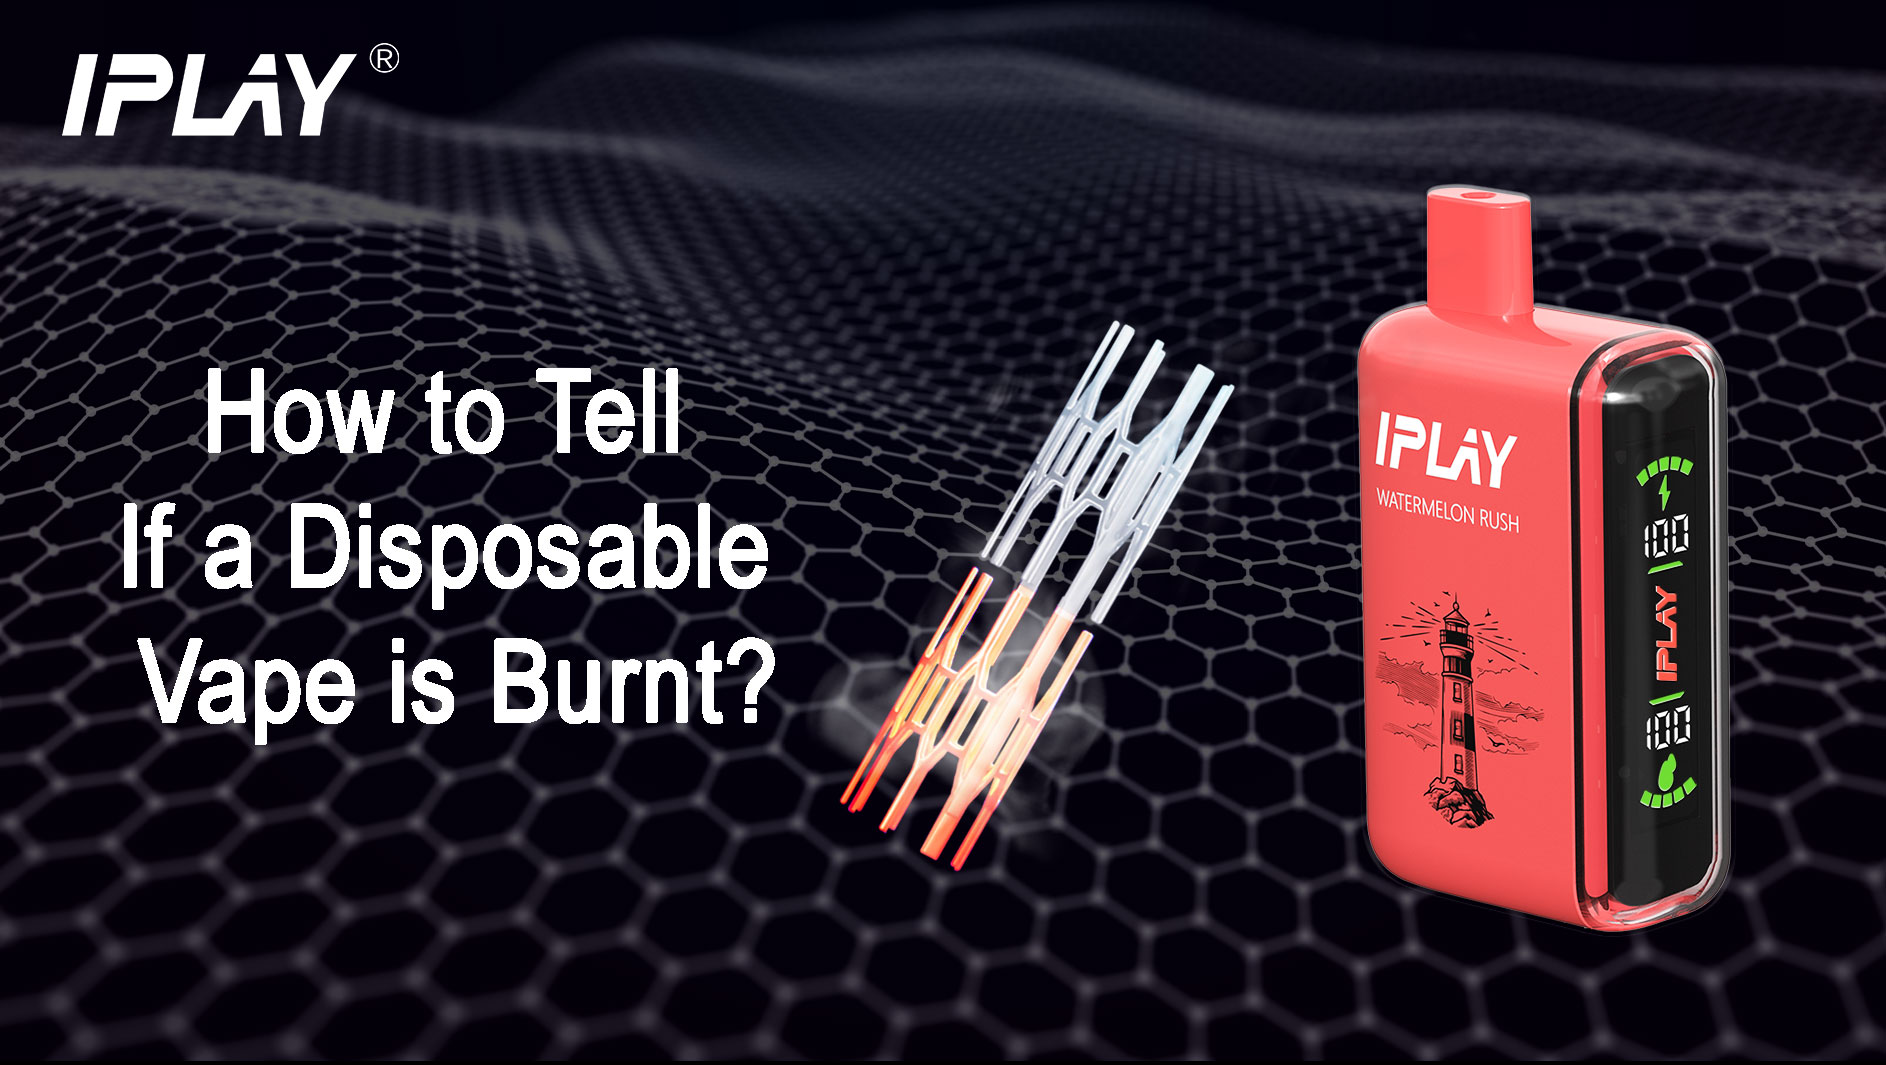 How to Tell if a Disposable Vape Is Burnt?